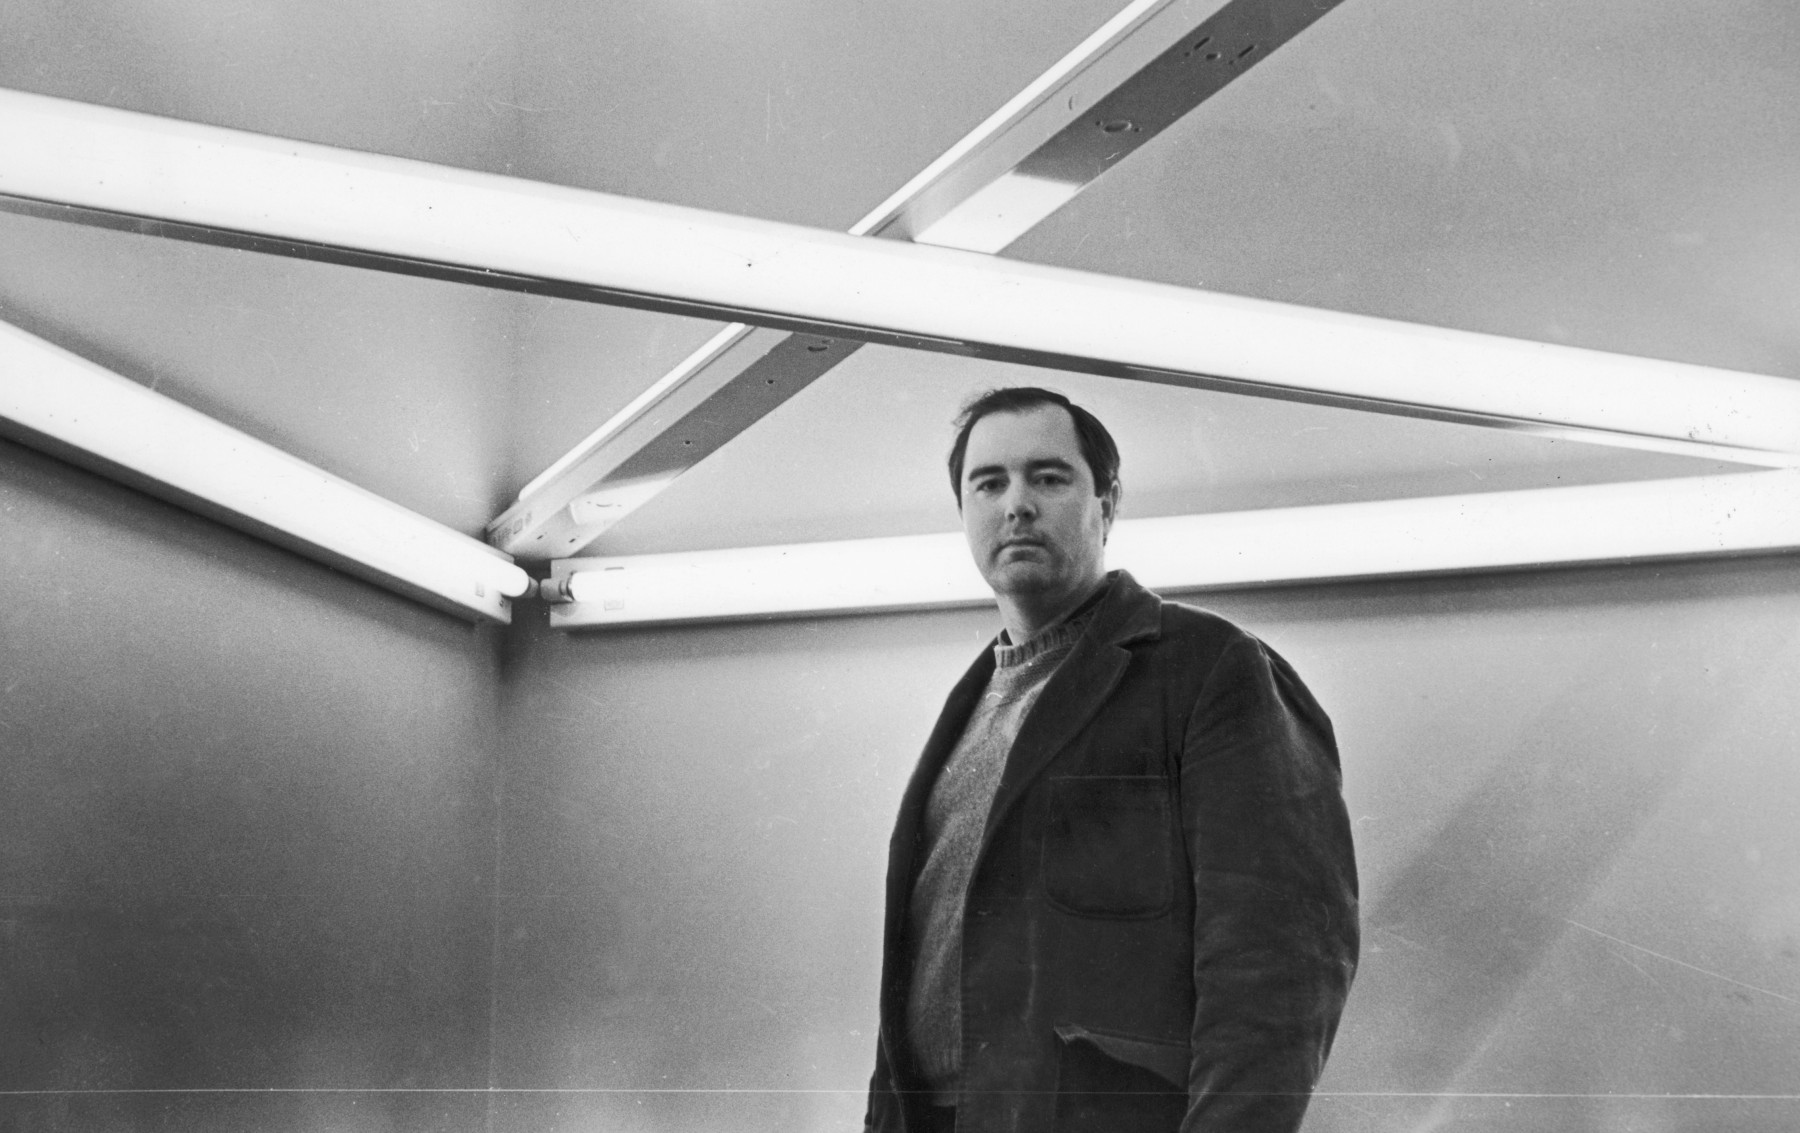 Dan Flavin with&amp;nbsp;monument 4 for those who have been killed in ambush (to P.K. who reminded me about death),&amp;nbsp;1966, at the&amp;nbsp;Primary Structures&amp;nbsp;exhibition at the Jewish Museum, New York, 1966.&amp;nbsp;
Photo by Fred W. McDarrah / MUUS Collection via Getty Images.